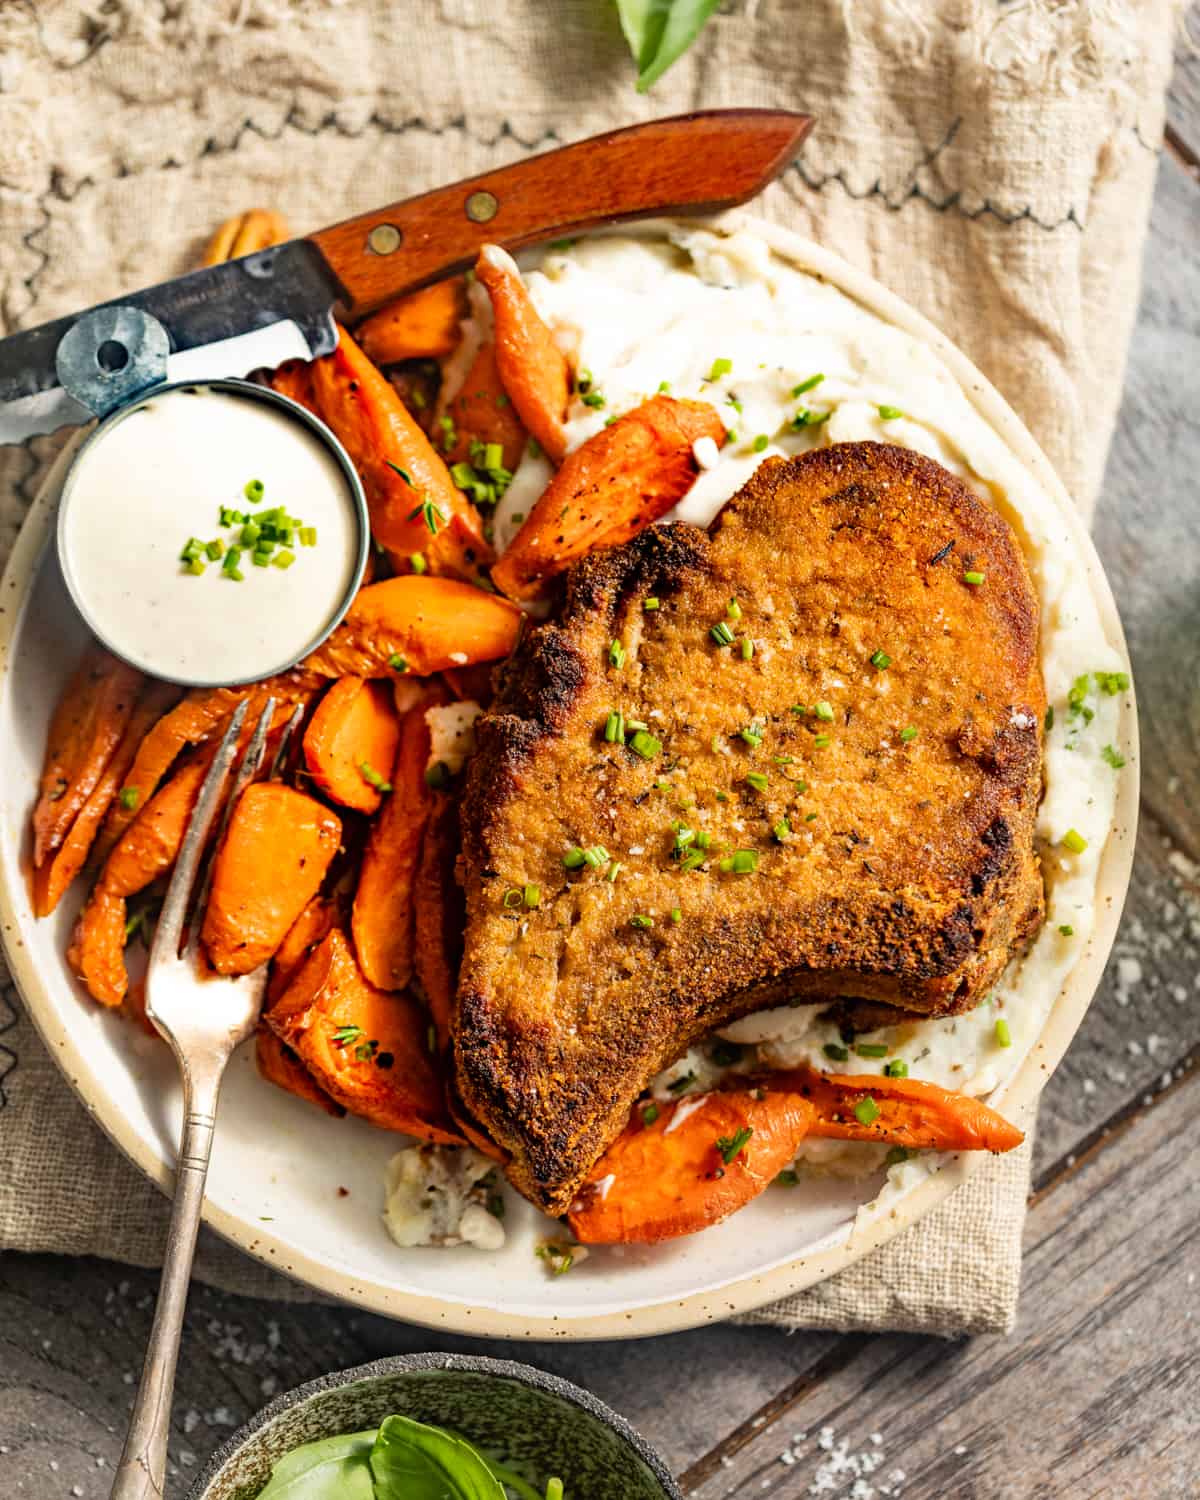 crispy baked pork chops on a plate with carrots and a fork and knife.